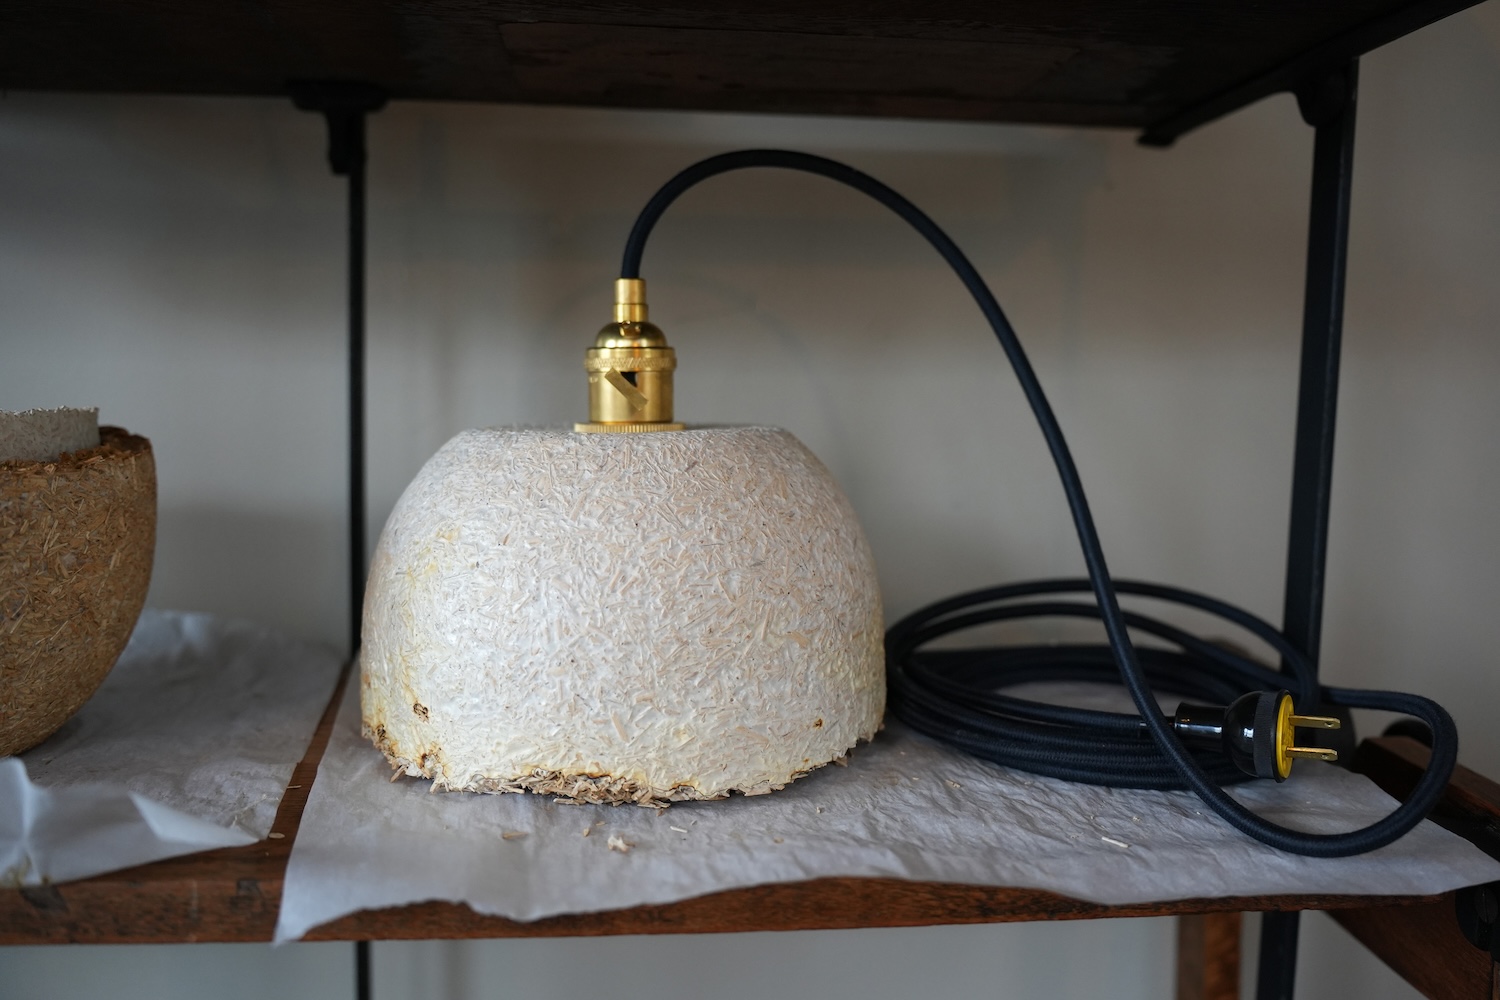 a close up of a pendant lamp with a textured surface placed on a shelf.